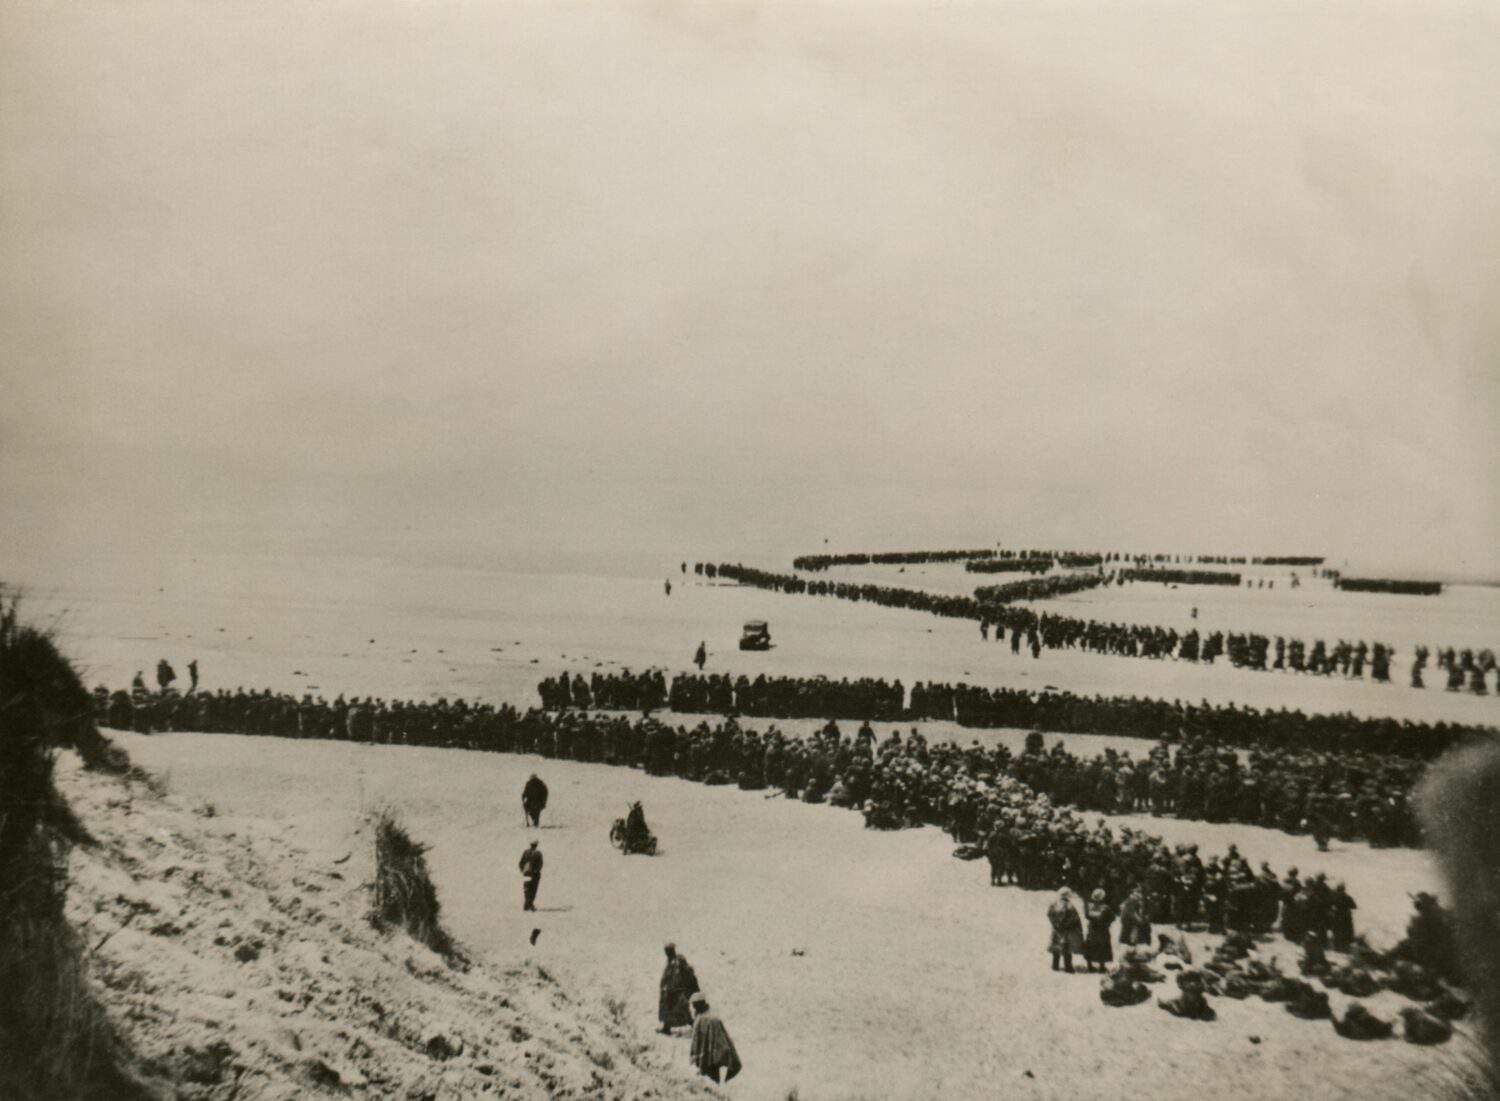 Military evacuation of Dunkirk during World War 2. Thousands of British and French troops wait on the dunes of Dunkirk beach for transport to England. May 26-June 4, 1940.